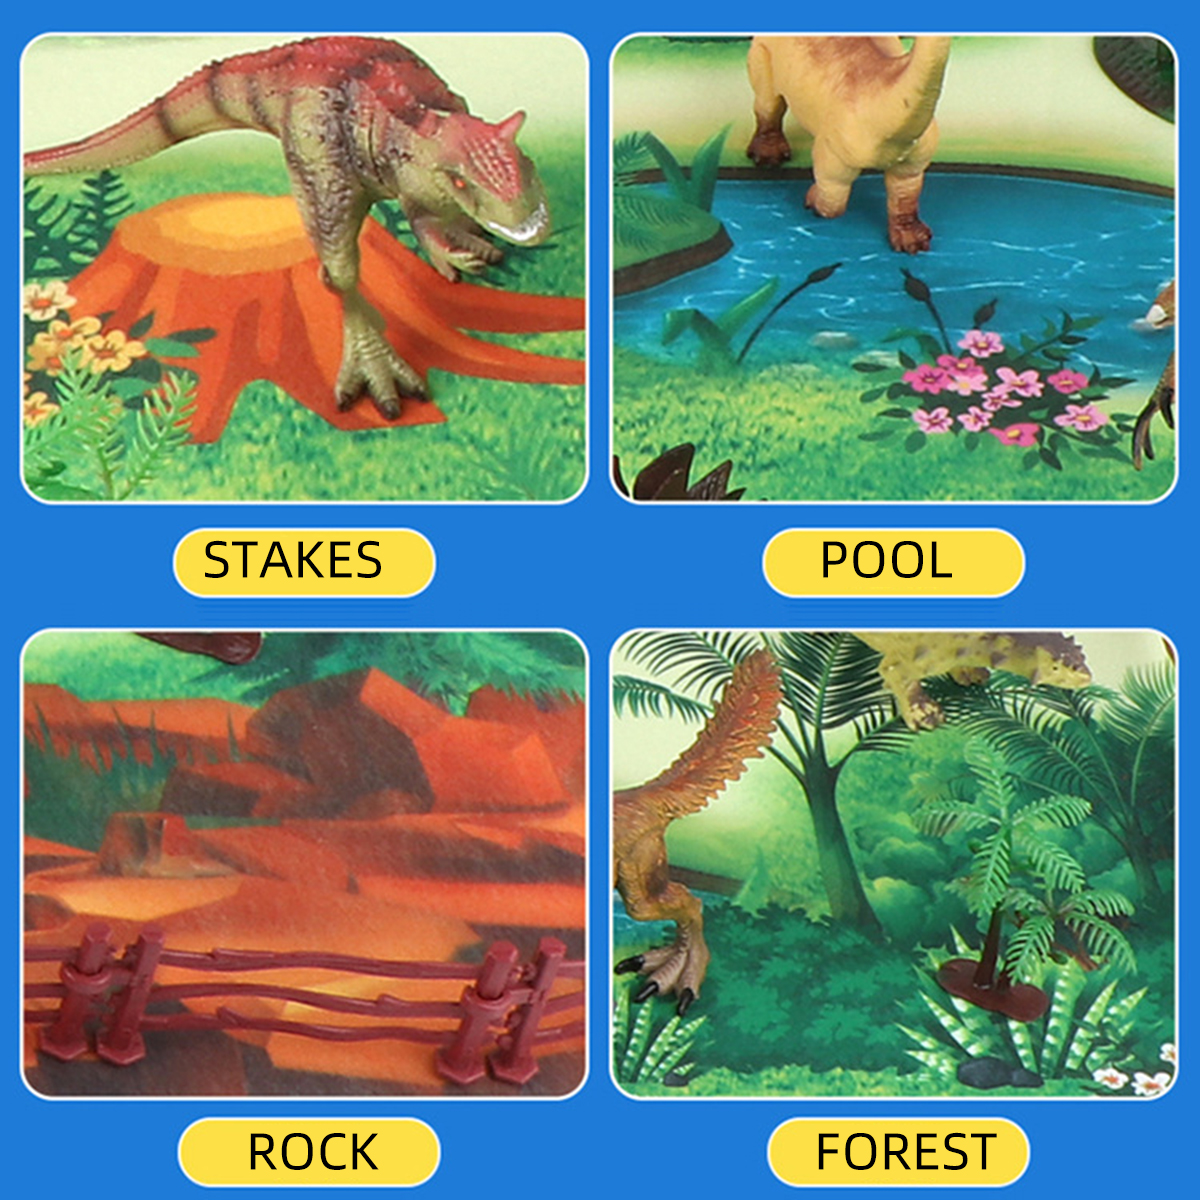 2833346365Pcs-Multi-style-Diecast-Dinosaurs-Model-Play-Set-Educational-Toy-with-Play-Mat-for-Kids-Ch-1836203-5